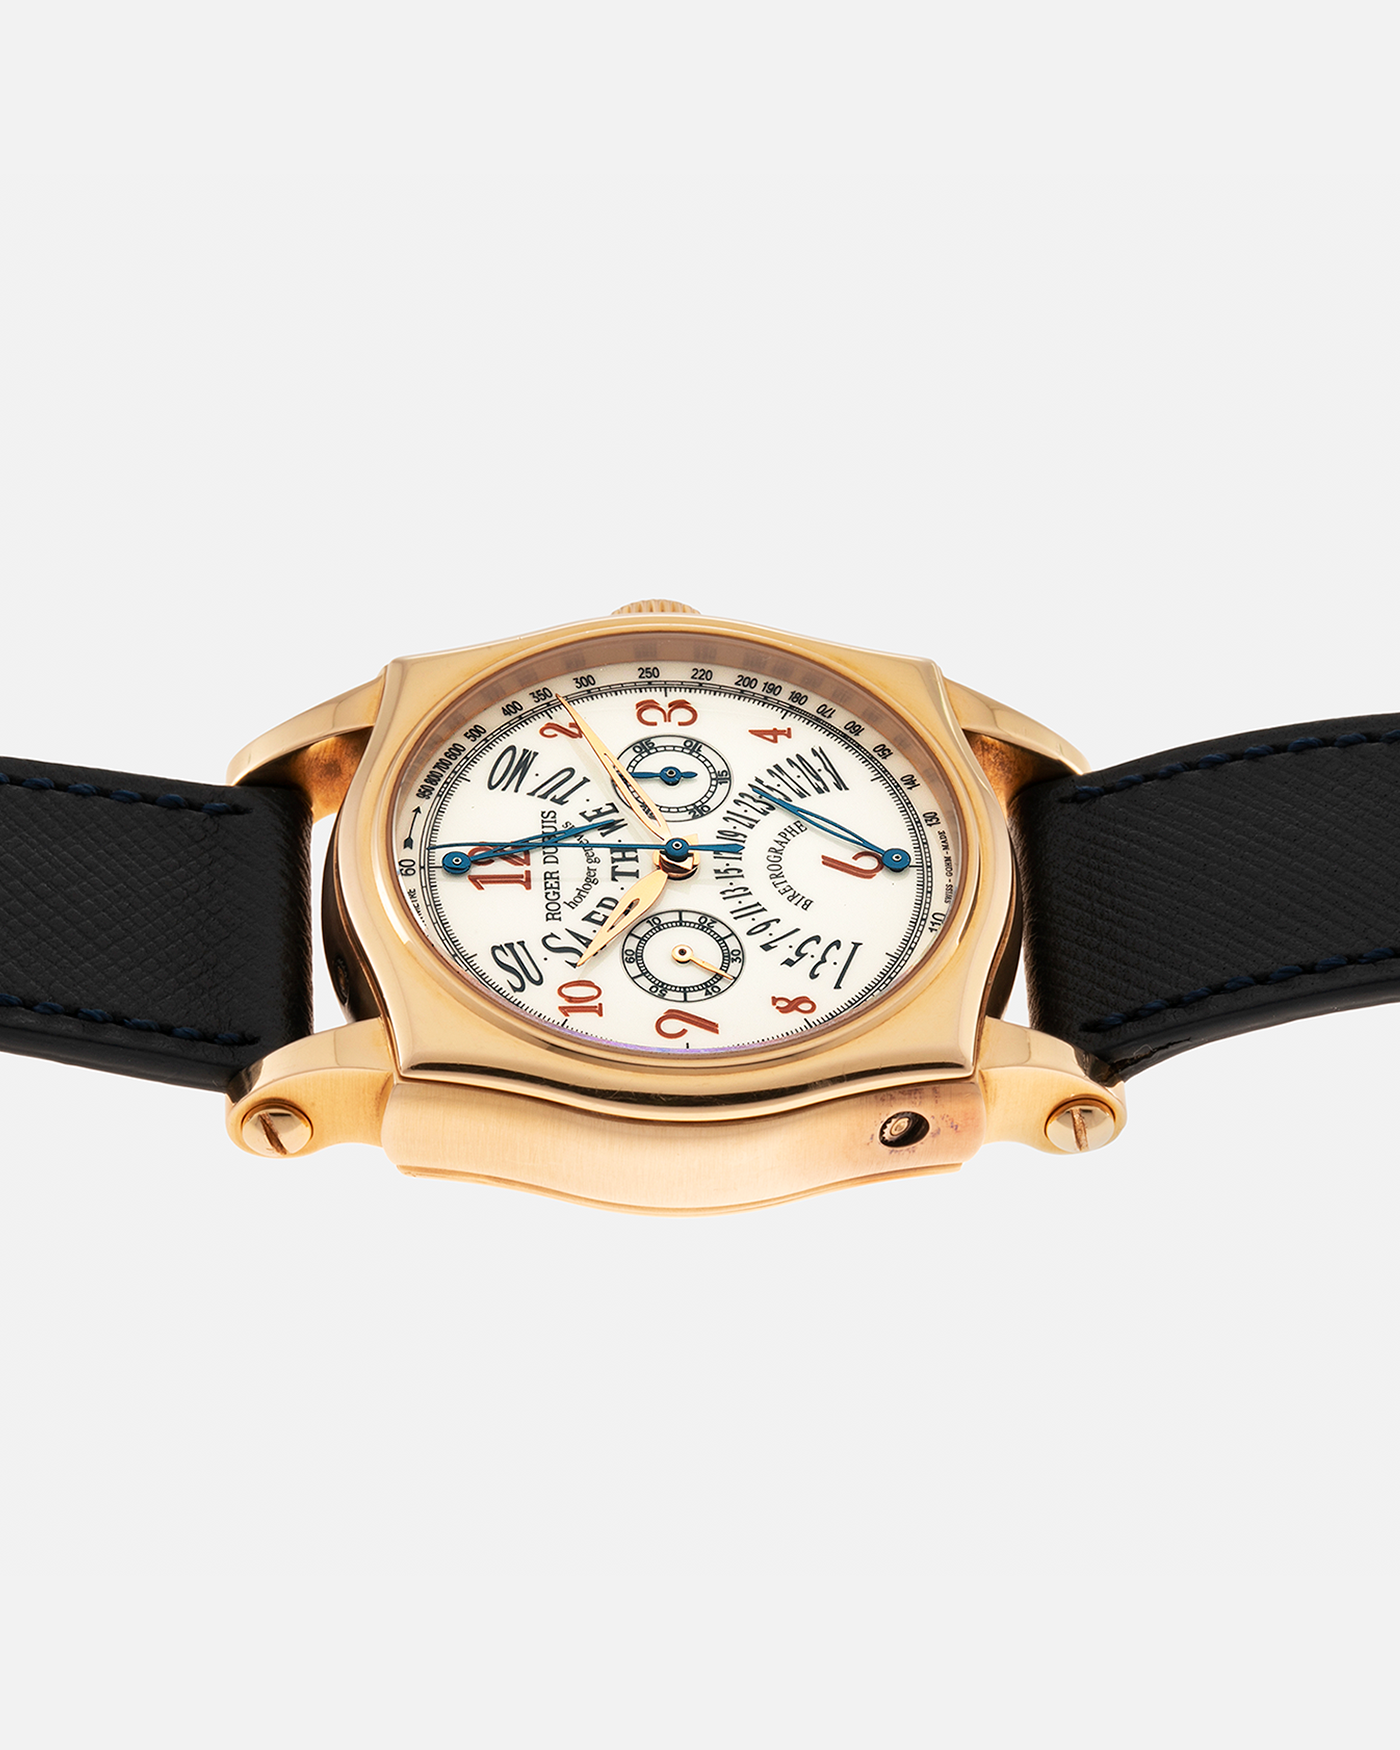 Brand: Roger Dubuis Year: 2000’s Model: Sympathie 40 Biretrograde Chronograph Material: 18-carat Yellow Gold Movement: Roger Dubuis Cal. RD 5630 (Based on the Lemania Cal. 2310), Manual-Winding Case Diameter: 40mm Strap: Molequin Navy Blue Textured Calf Leather Strap with Signed 18-carat Yellow Gold Roger Dubuis Tang Buckle